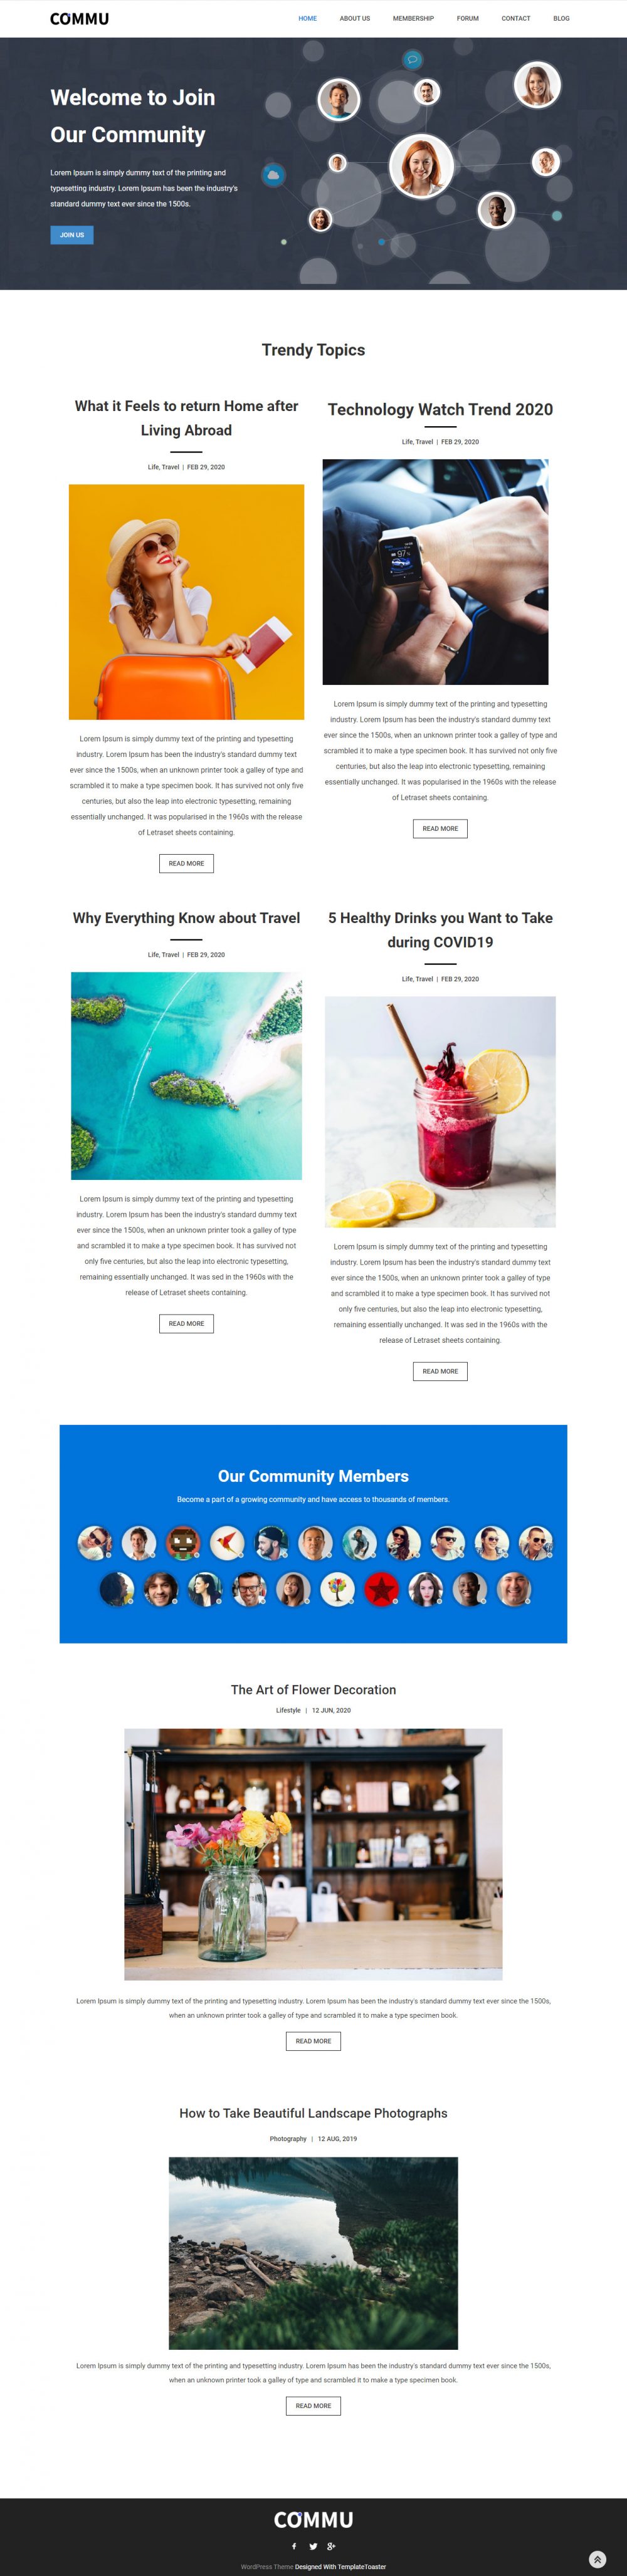 Commu - Social Networking & Community Blogger Template